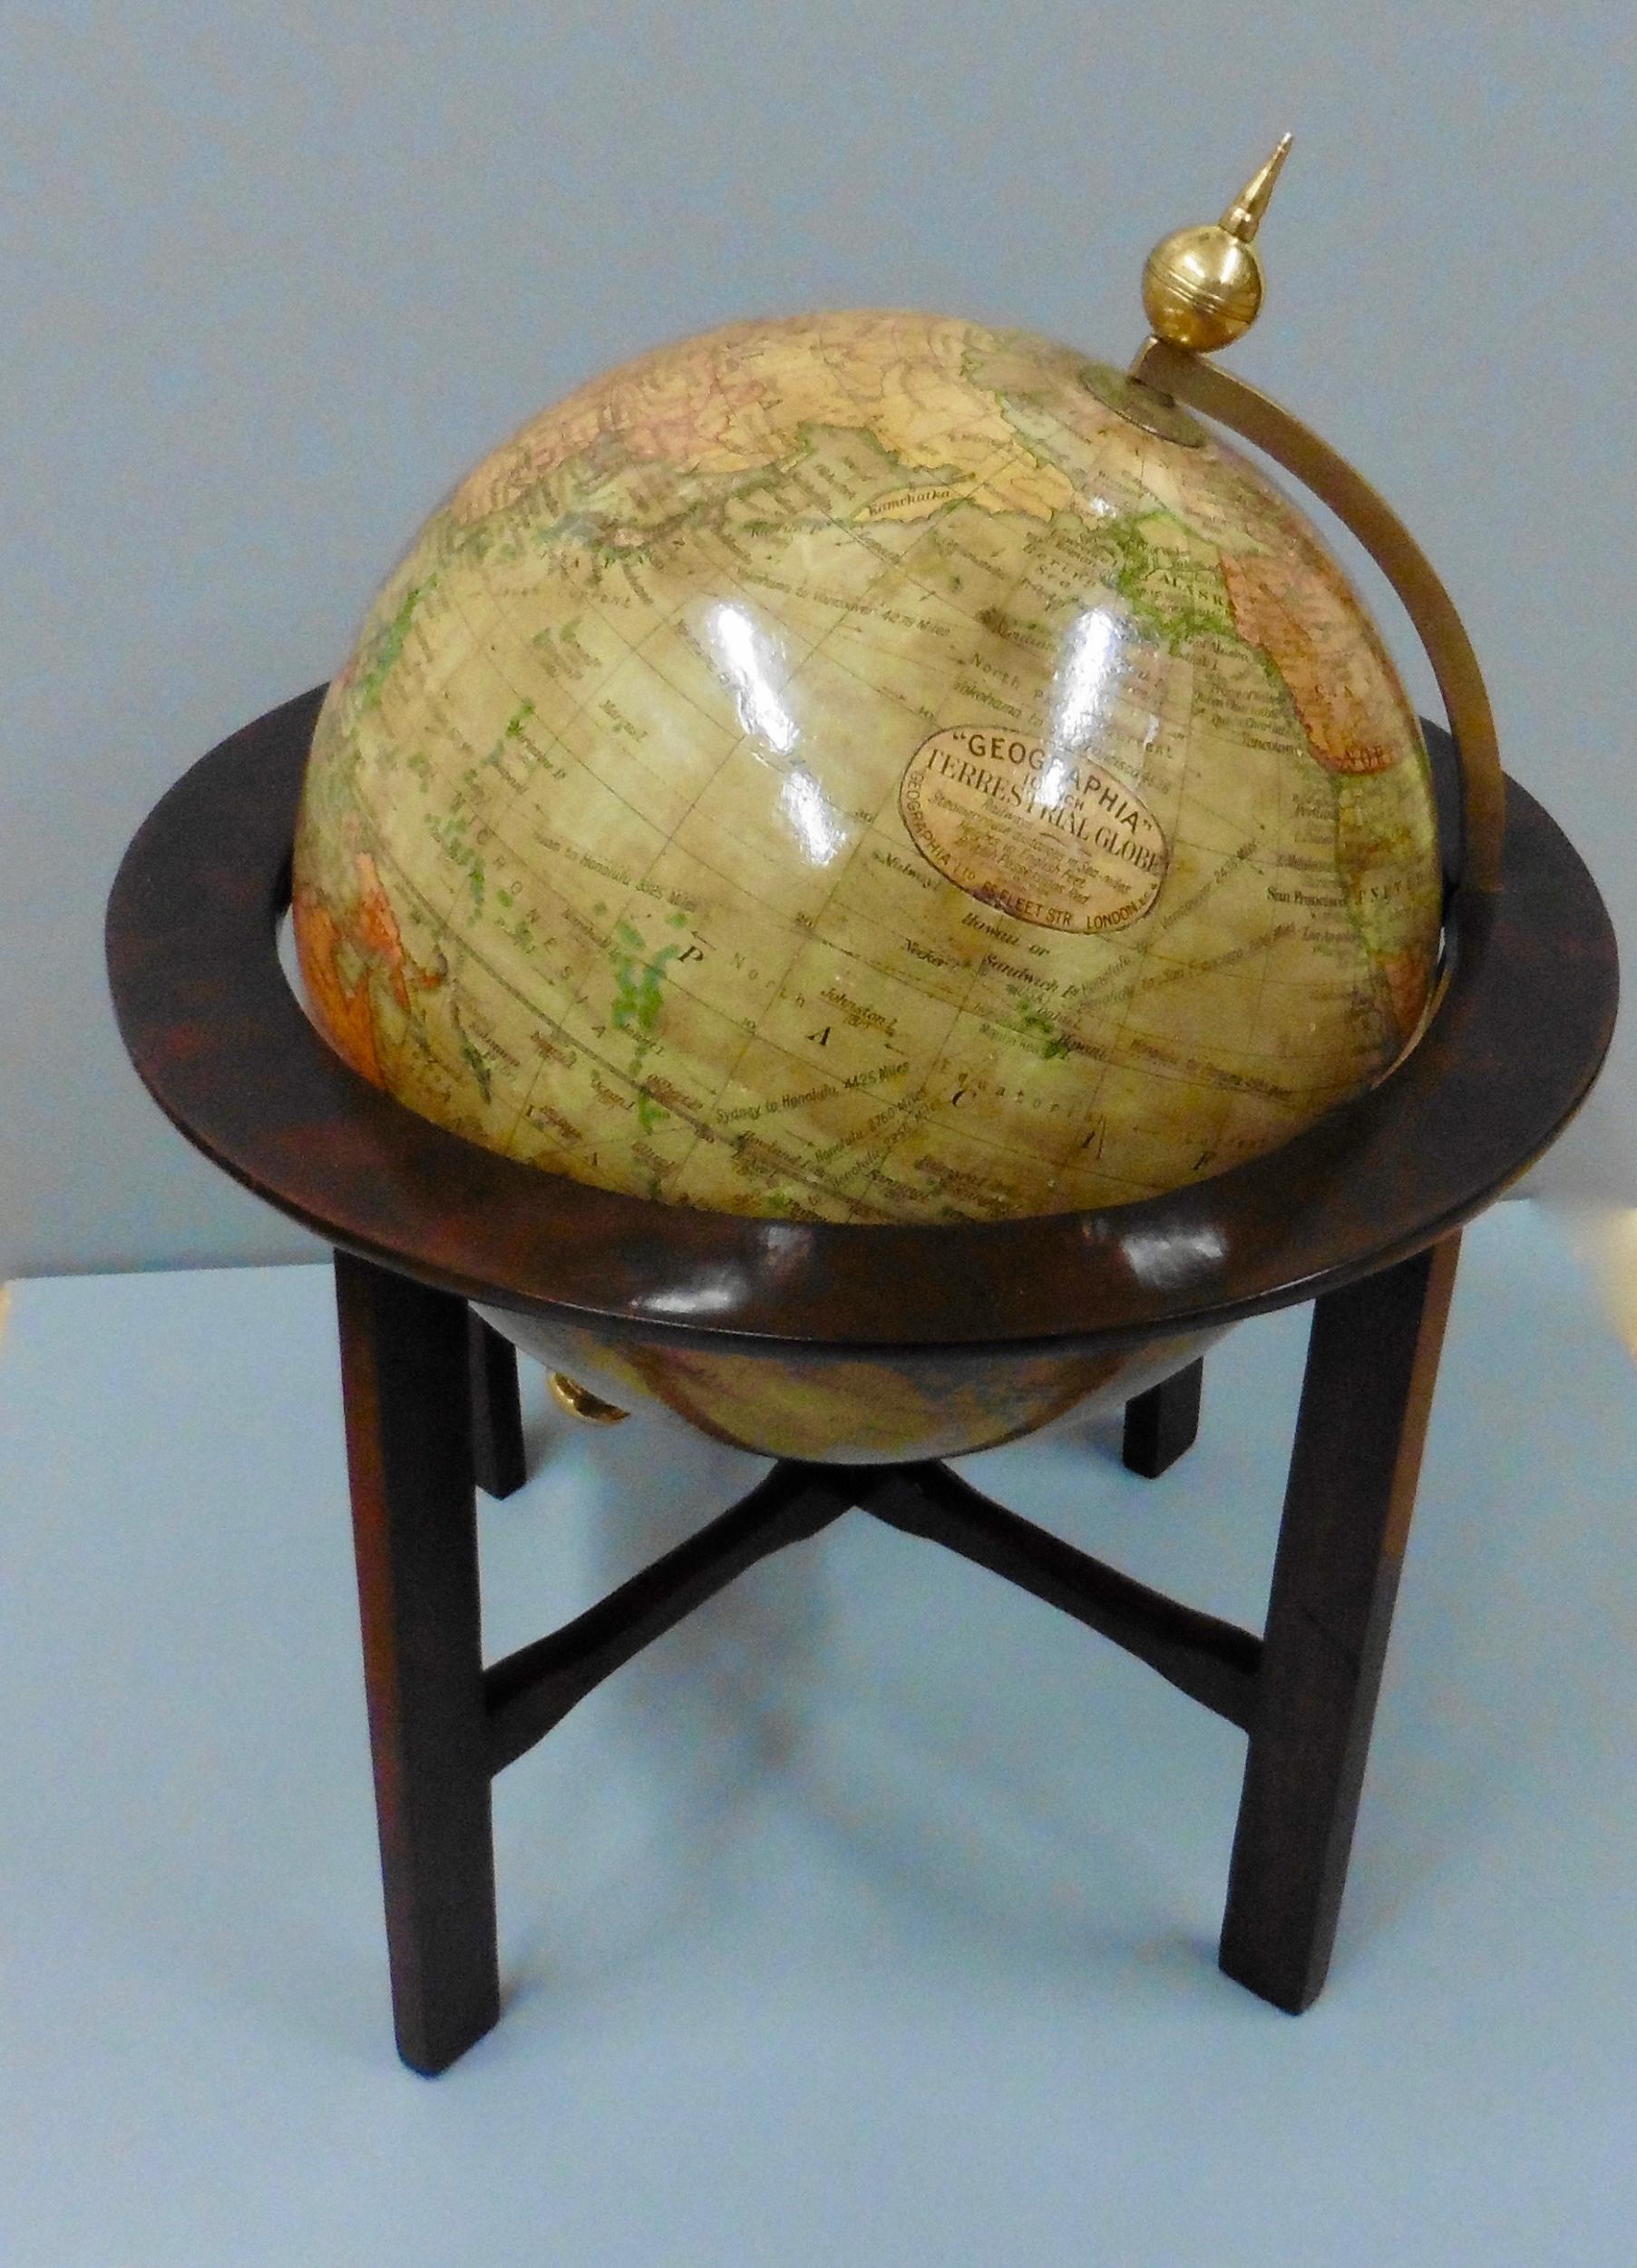 Edwardian terrestrial Geographia tabletop globe.

Edwardian terrestrial Geographia 10 inch tabletop globe standing on a raised stained mahogany stand.

This globe is complete with it’s original colored paper gores, brass half meridian surmounted